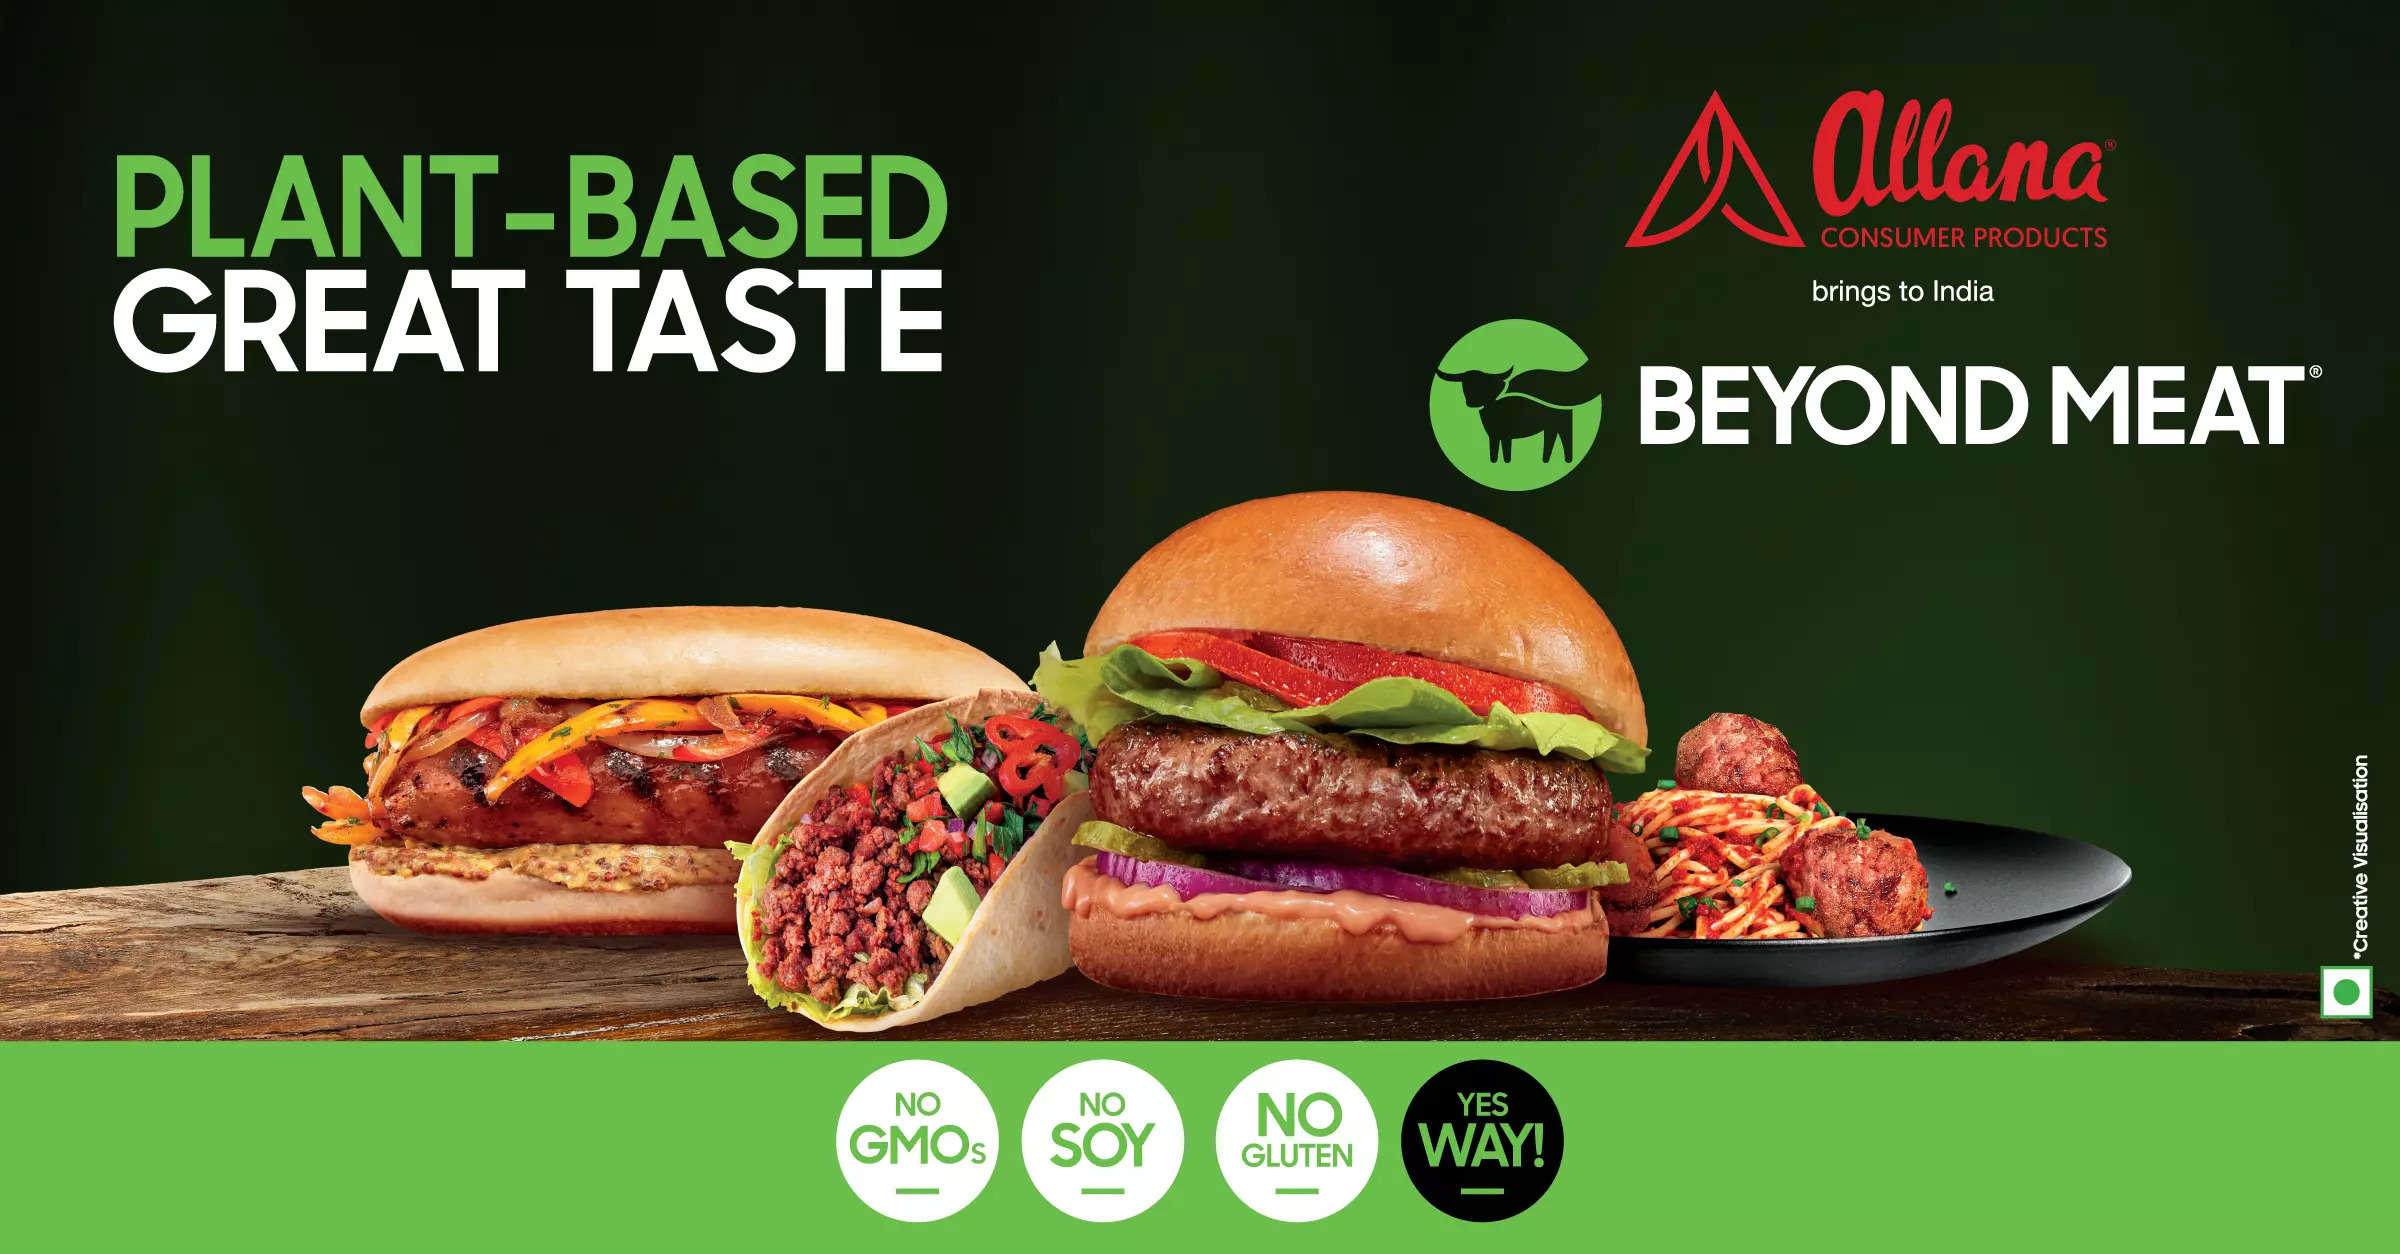 Plant-based meat brand, Beyond Meat enters India through Allana